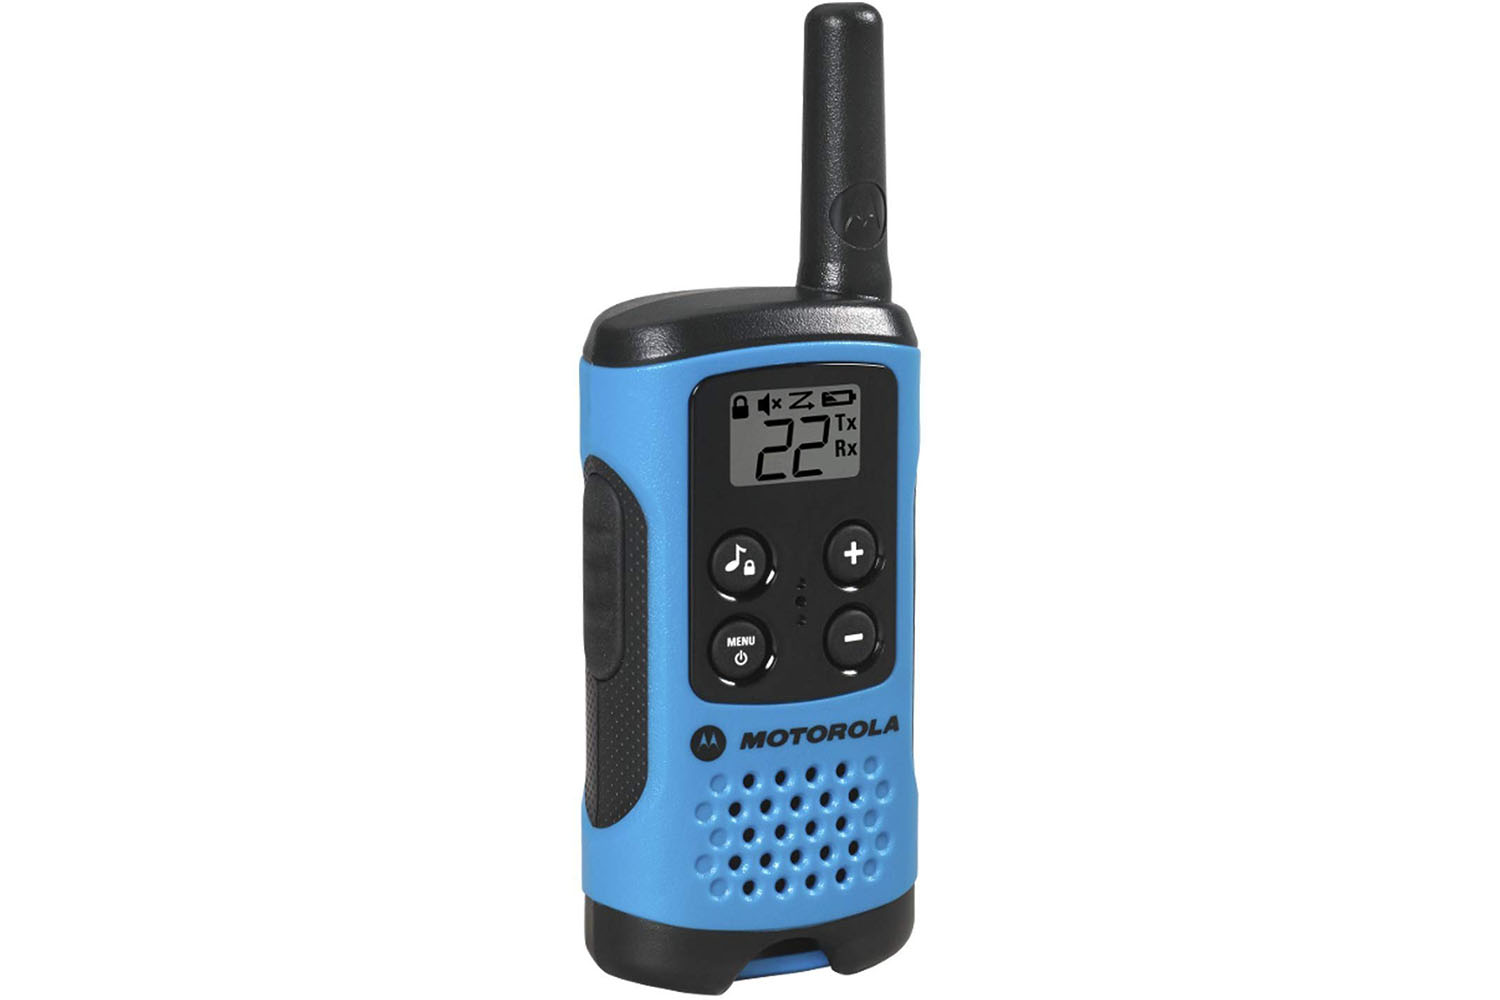 Difference between professional walkie-talkie and amateur walkie-talkie -  Walkie-Talkie